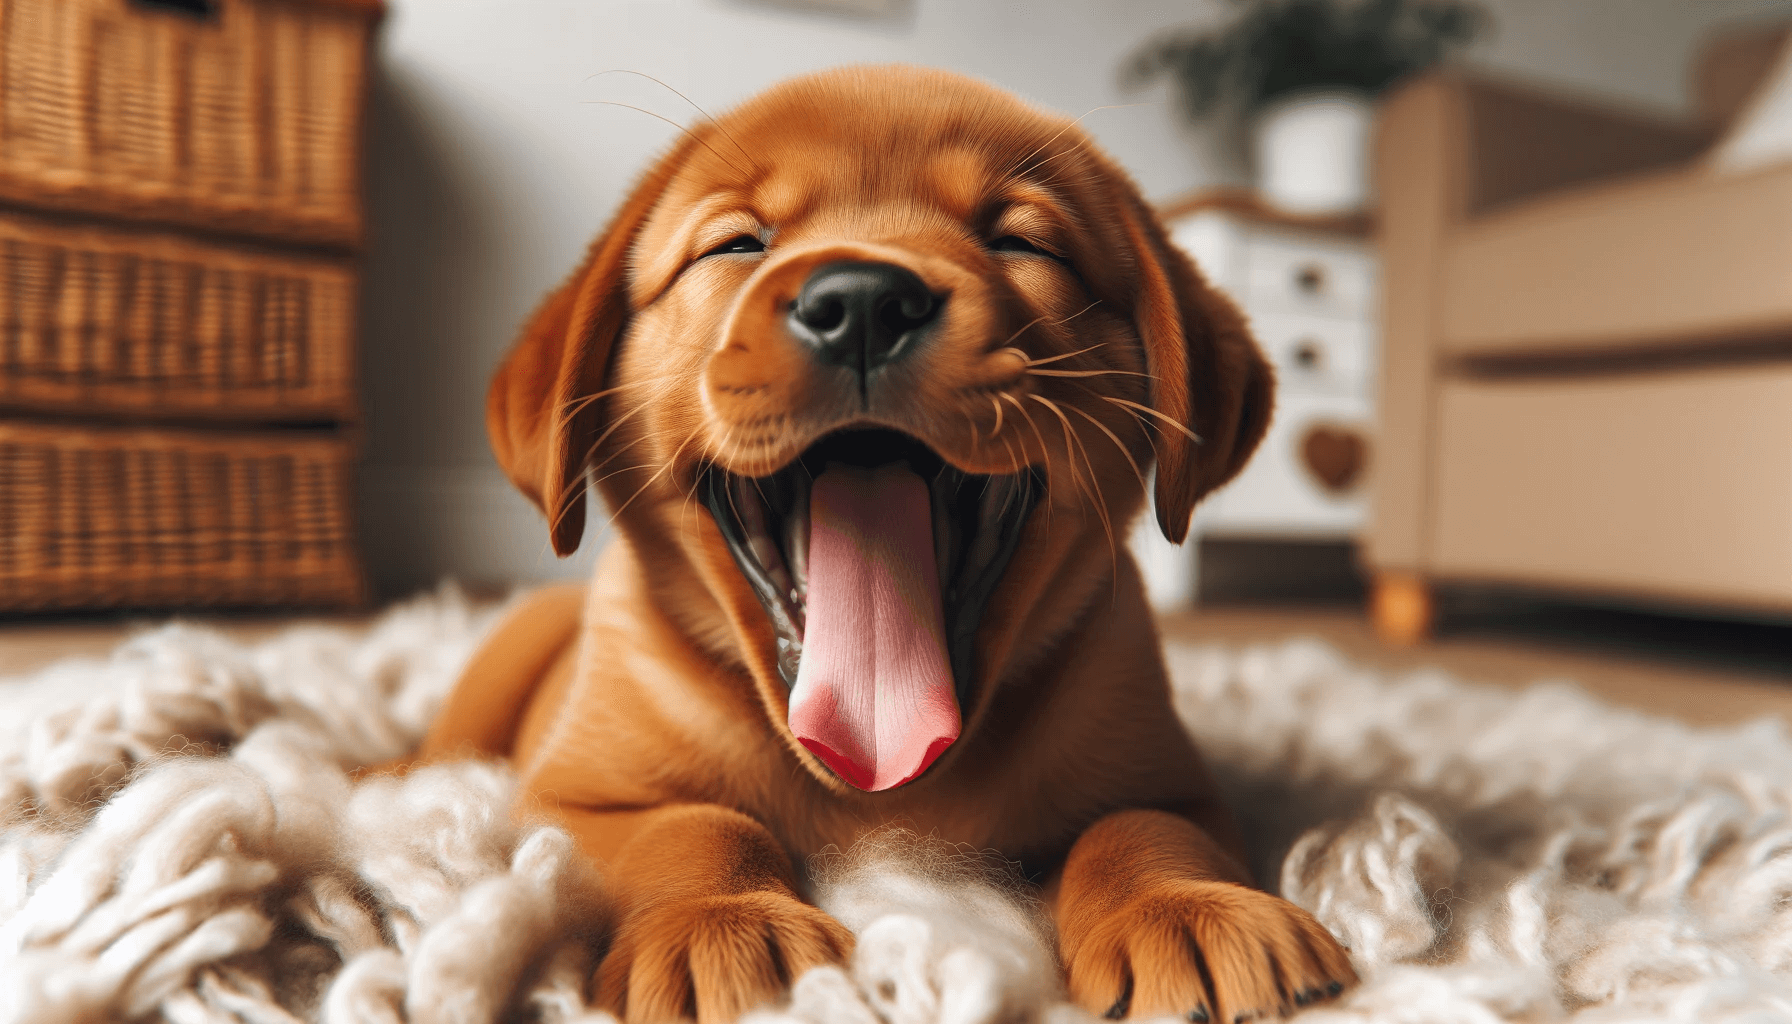 Red Fox Labrador puppy lying on a fluffy white blanket, yawning or laughing with its eyes closed, looking very happy and content in a cozy indoor setting